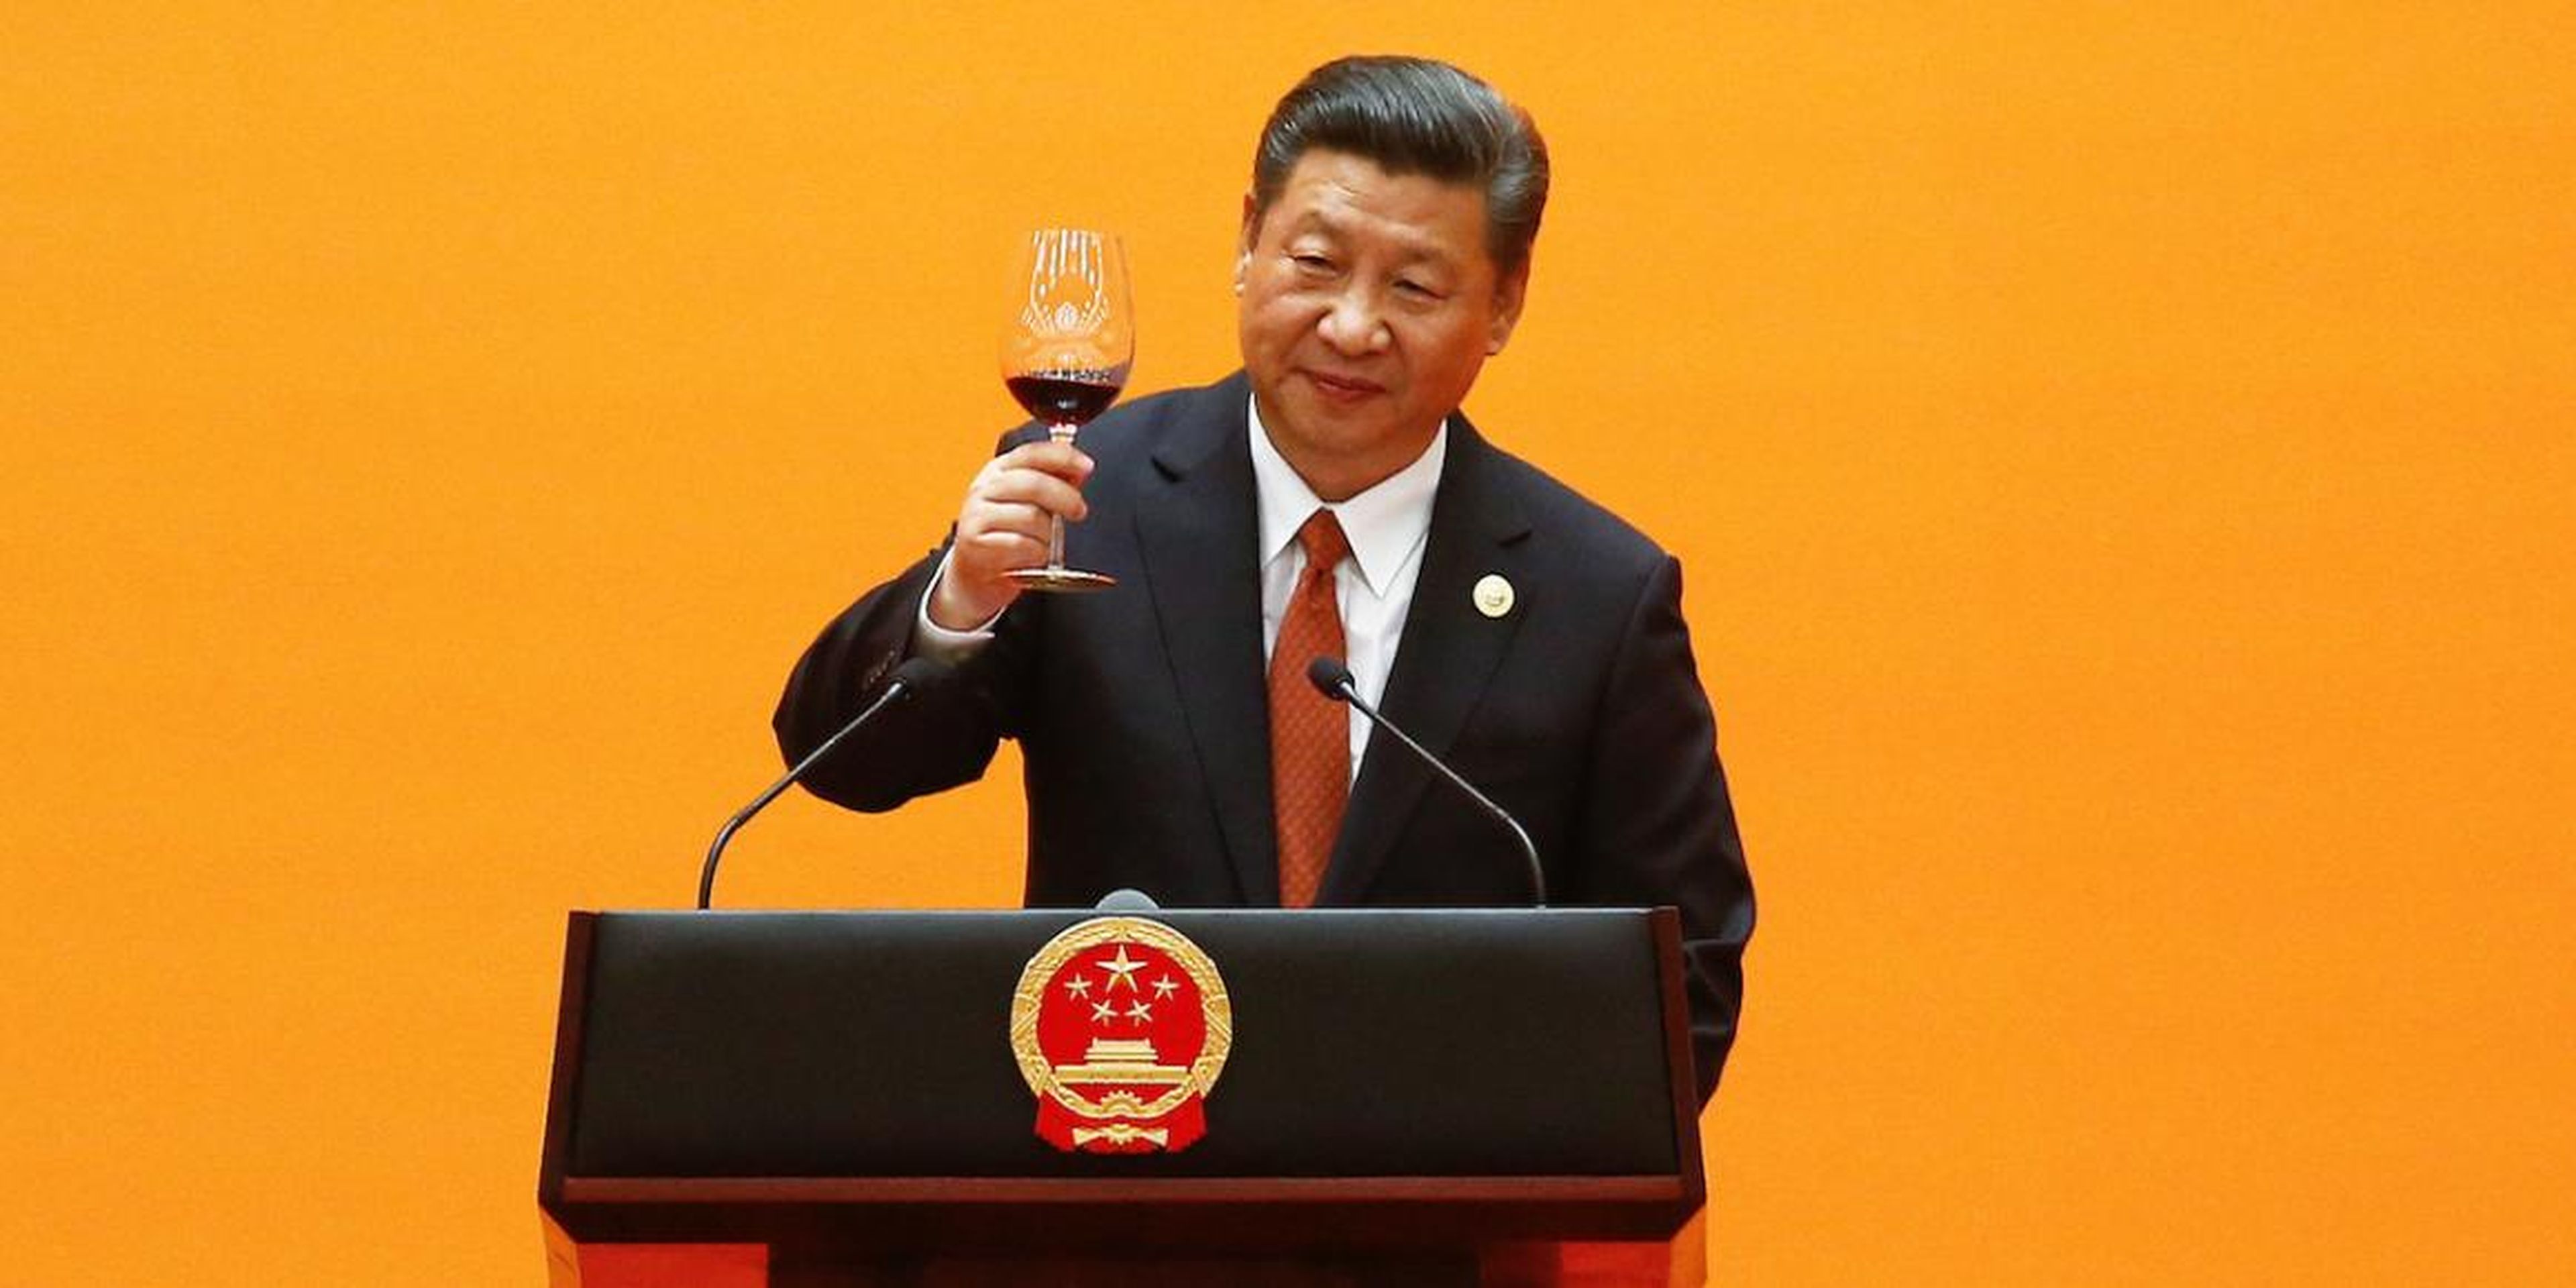 Public disappearances are not unusual in Chinese politics. Here, President Xi Jinping makes a toast at a banquet in Beijing in May 2017.